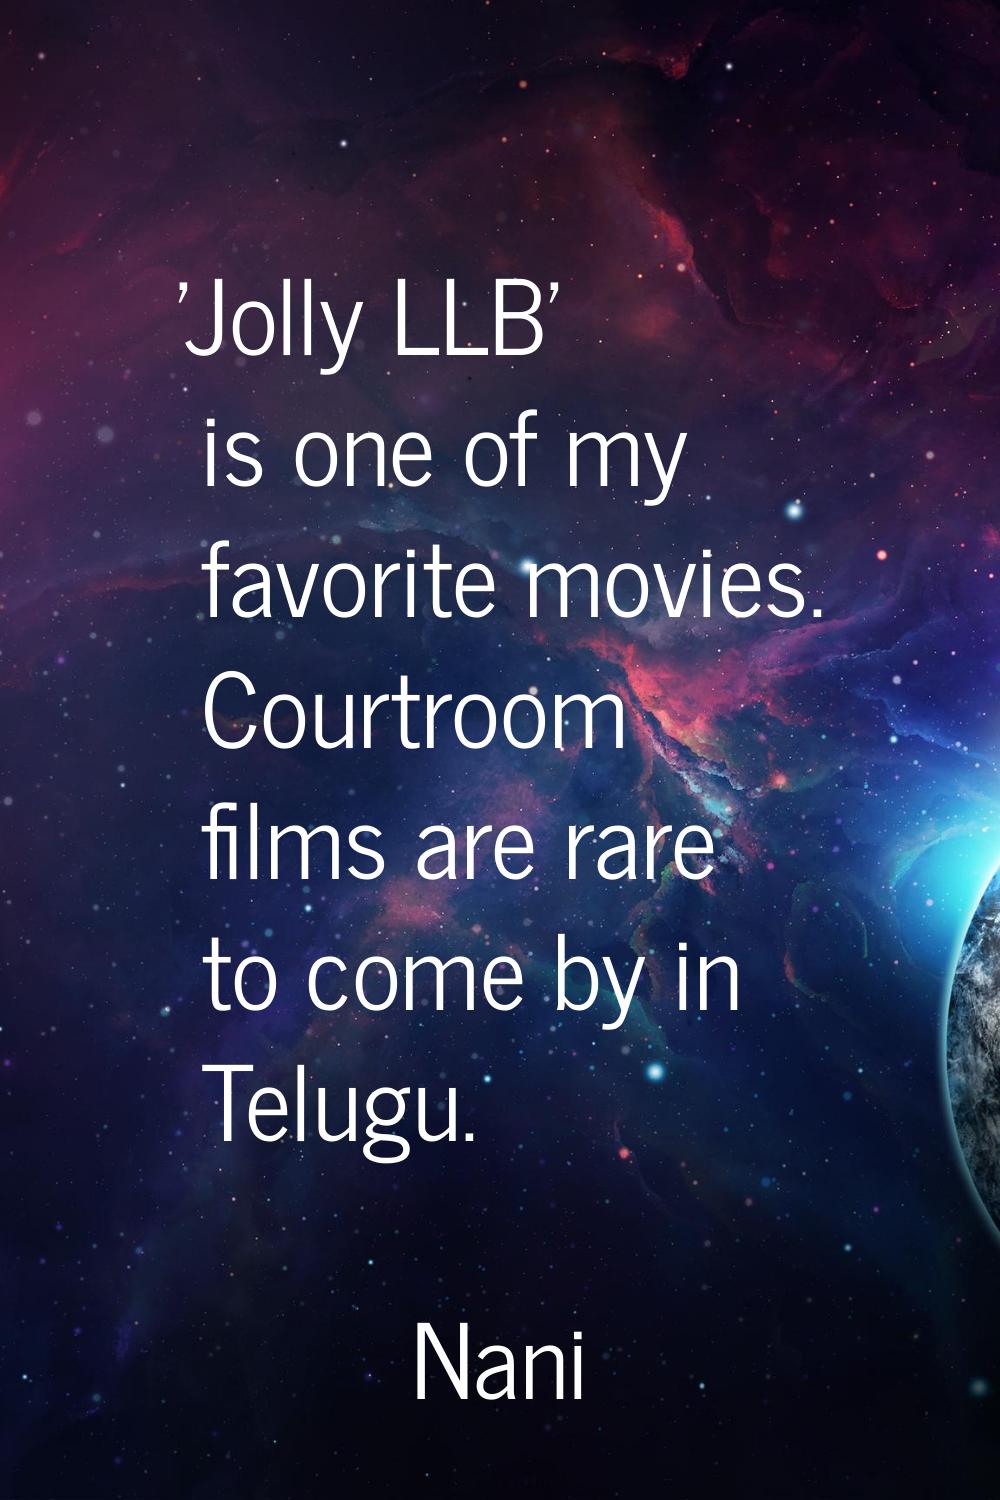 'Jolly LLB' is one of my favorite movies. Courtroom films are rare to come by in Telugu.